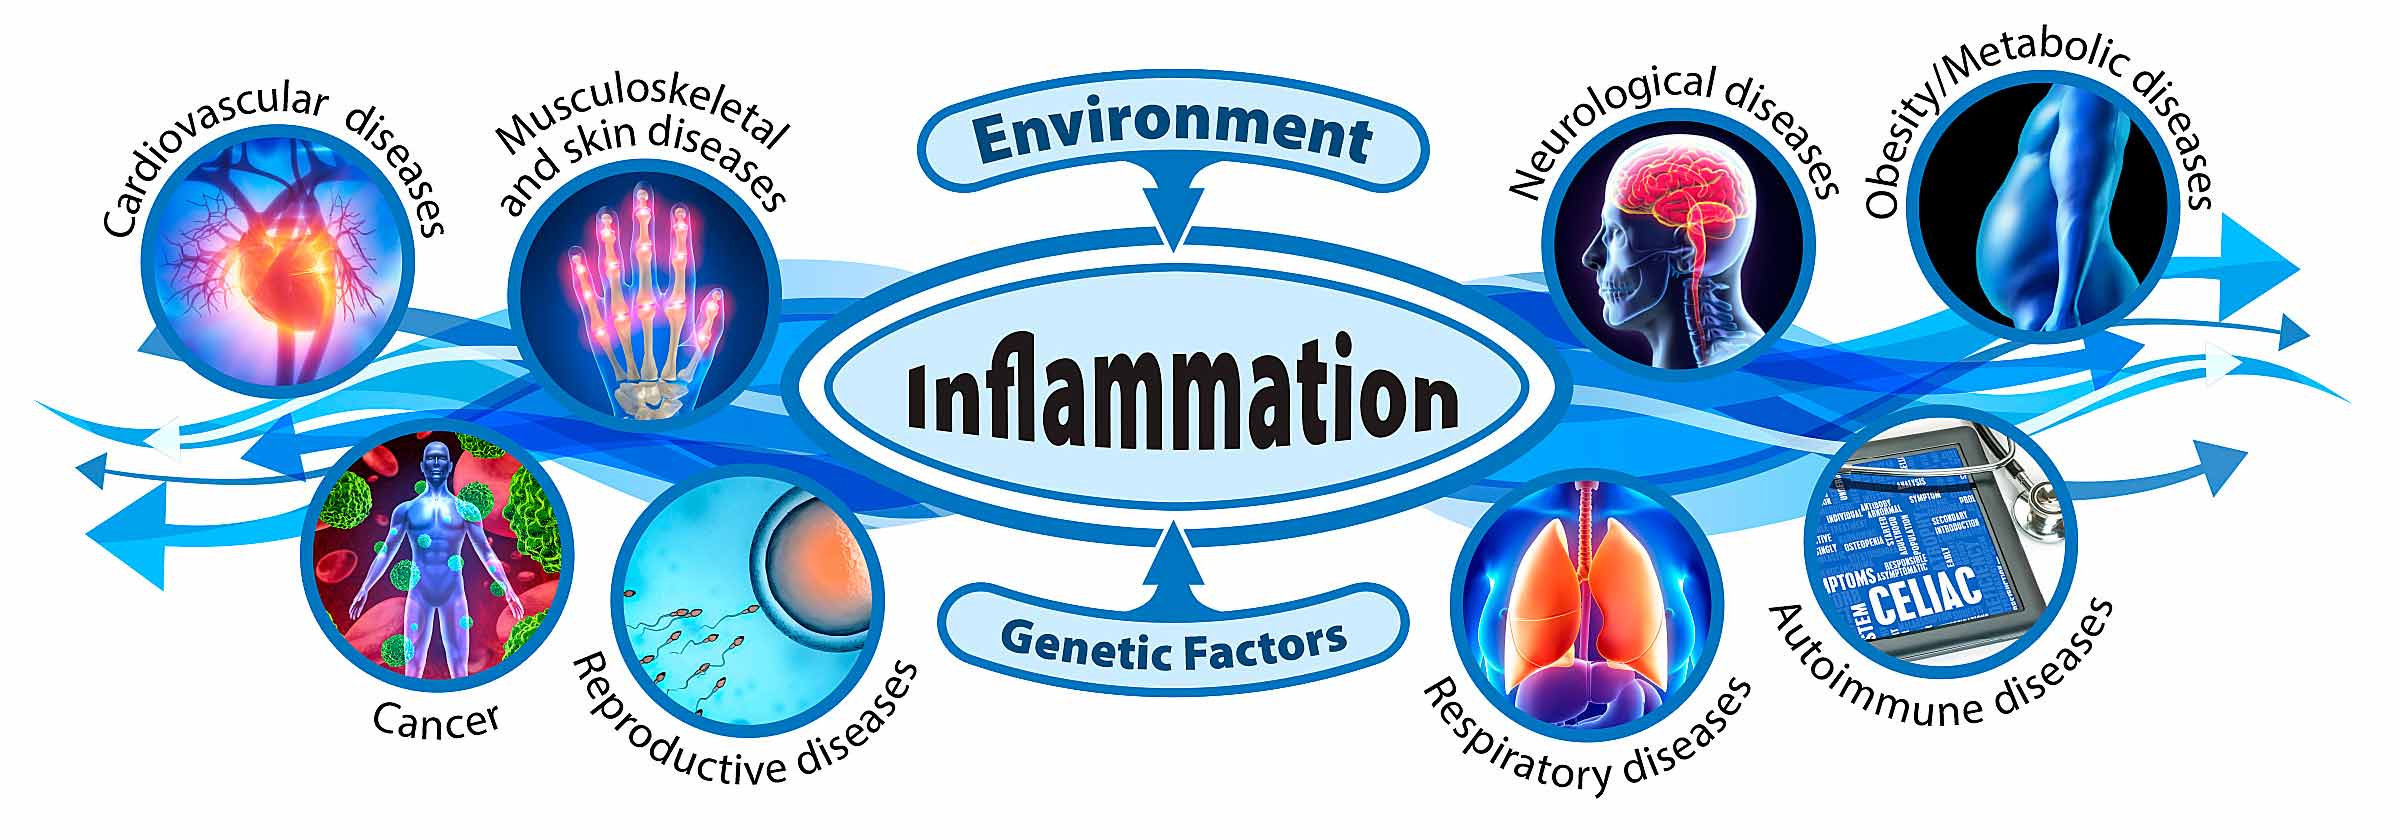 graphical representation of environmental and genetic factors contributing to various inflammatory states